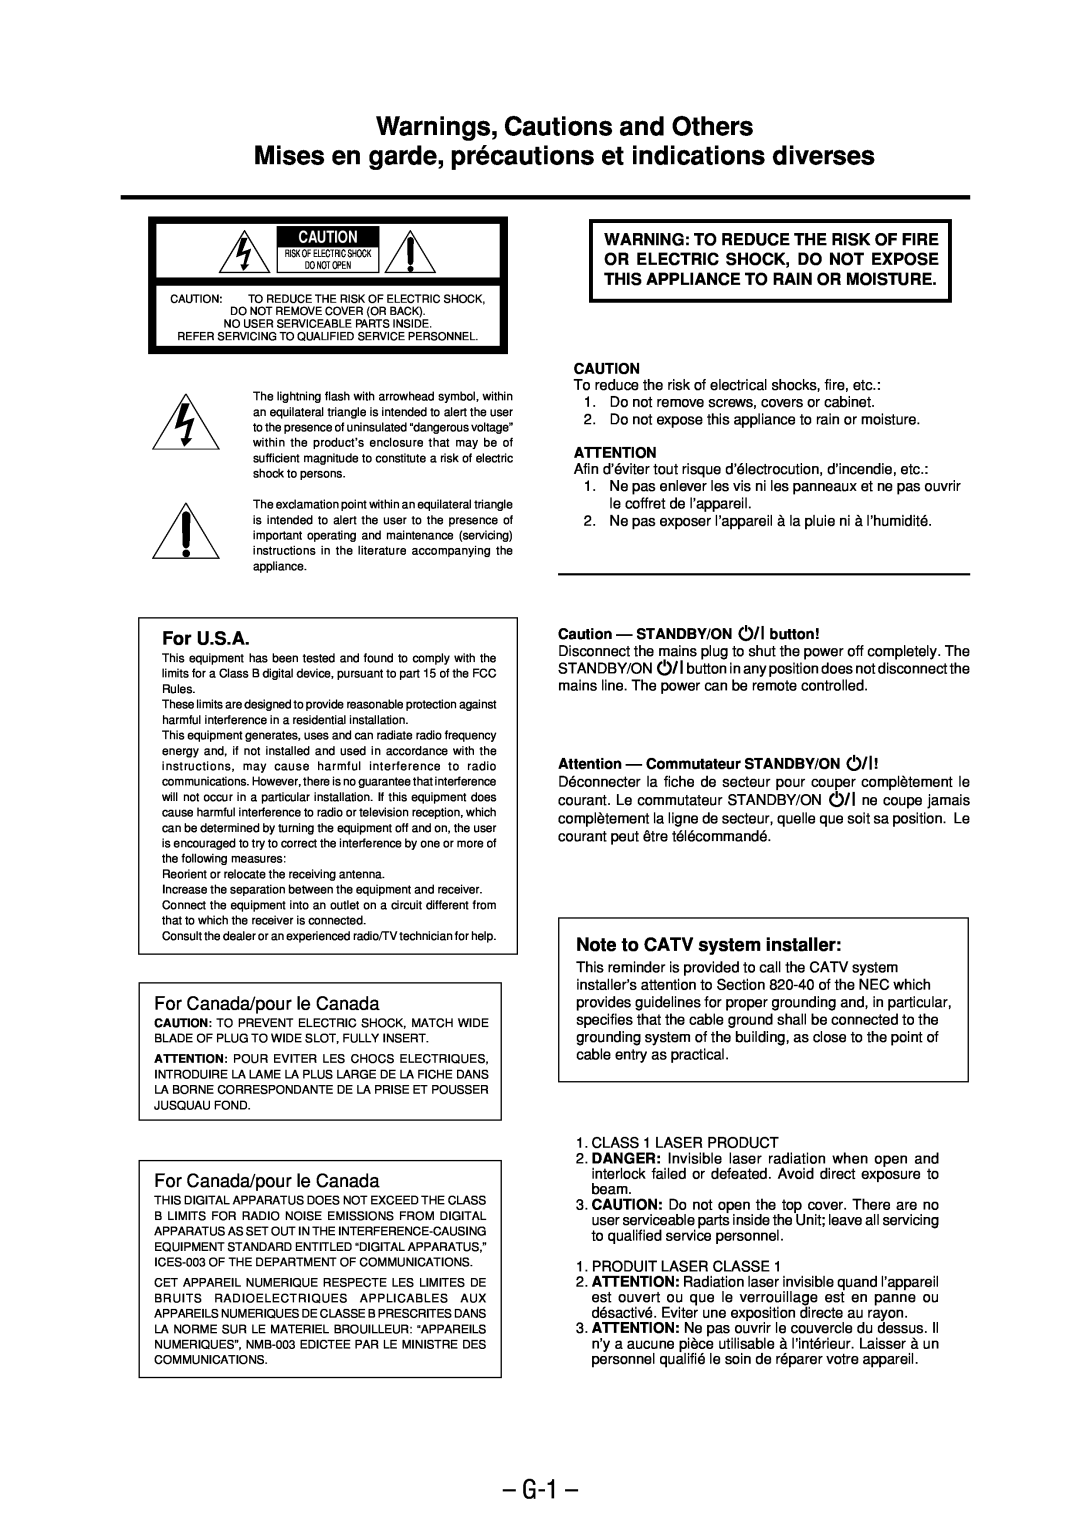 JVC FS-M3 manual Warnings, Cautions and Others, G-1, For U.S.A, For Canada/pour le Canada, Note to CATV system installer 